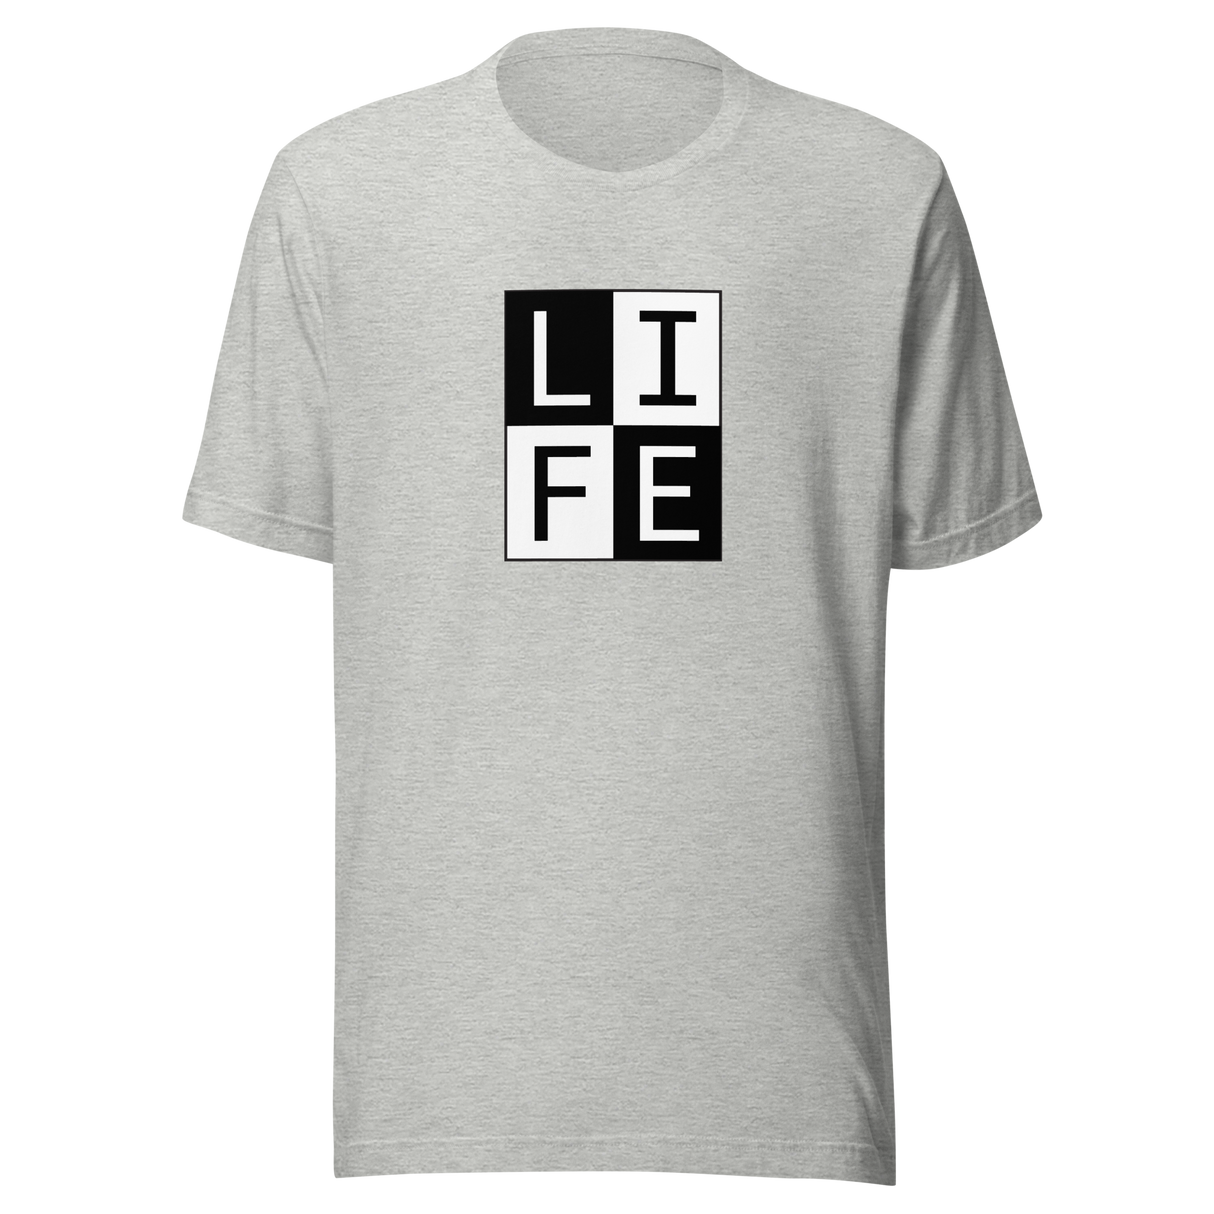 life-square-outline-white-on-black-life-tee-letters-t-shirt-blocks-tee-life-t-shirt-tee#color_athletic-heather